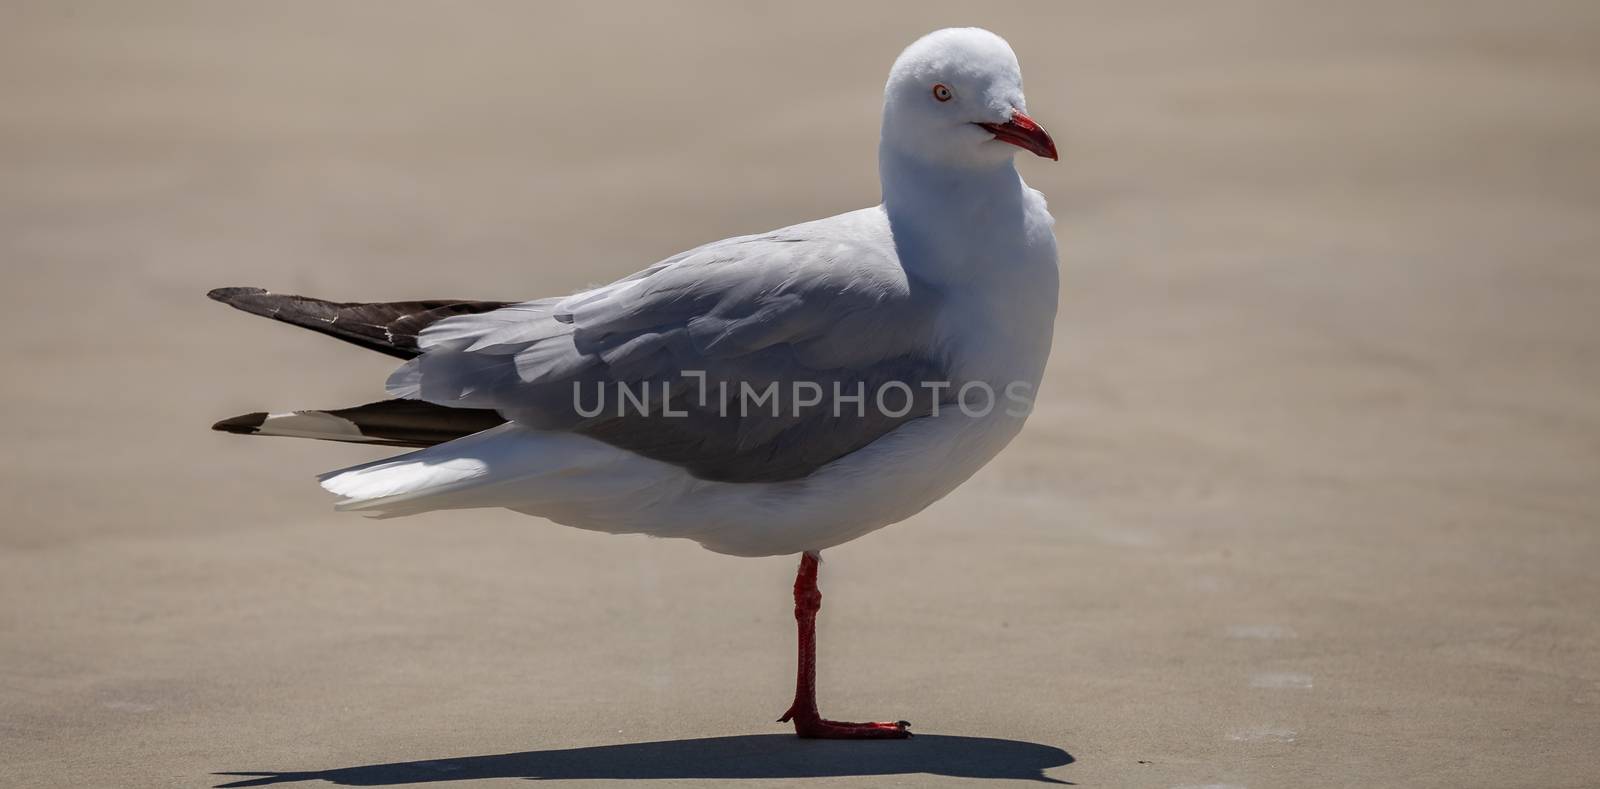 Seagull standing on concrete and looking curiously at the camera. Blurred background